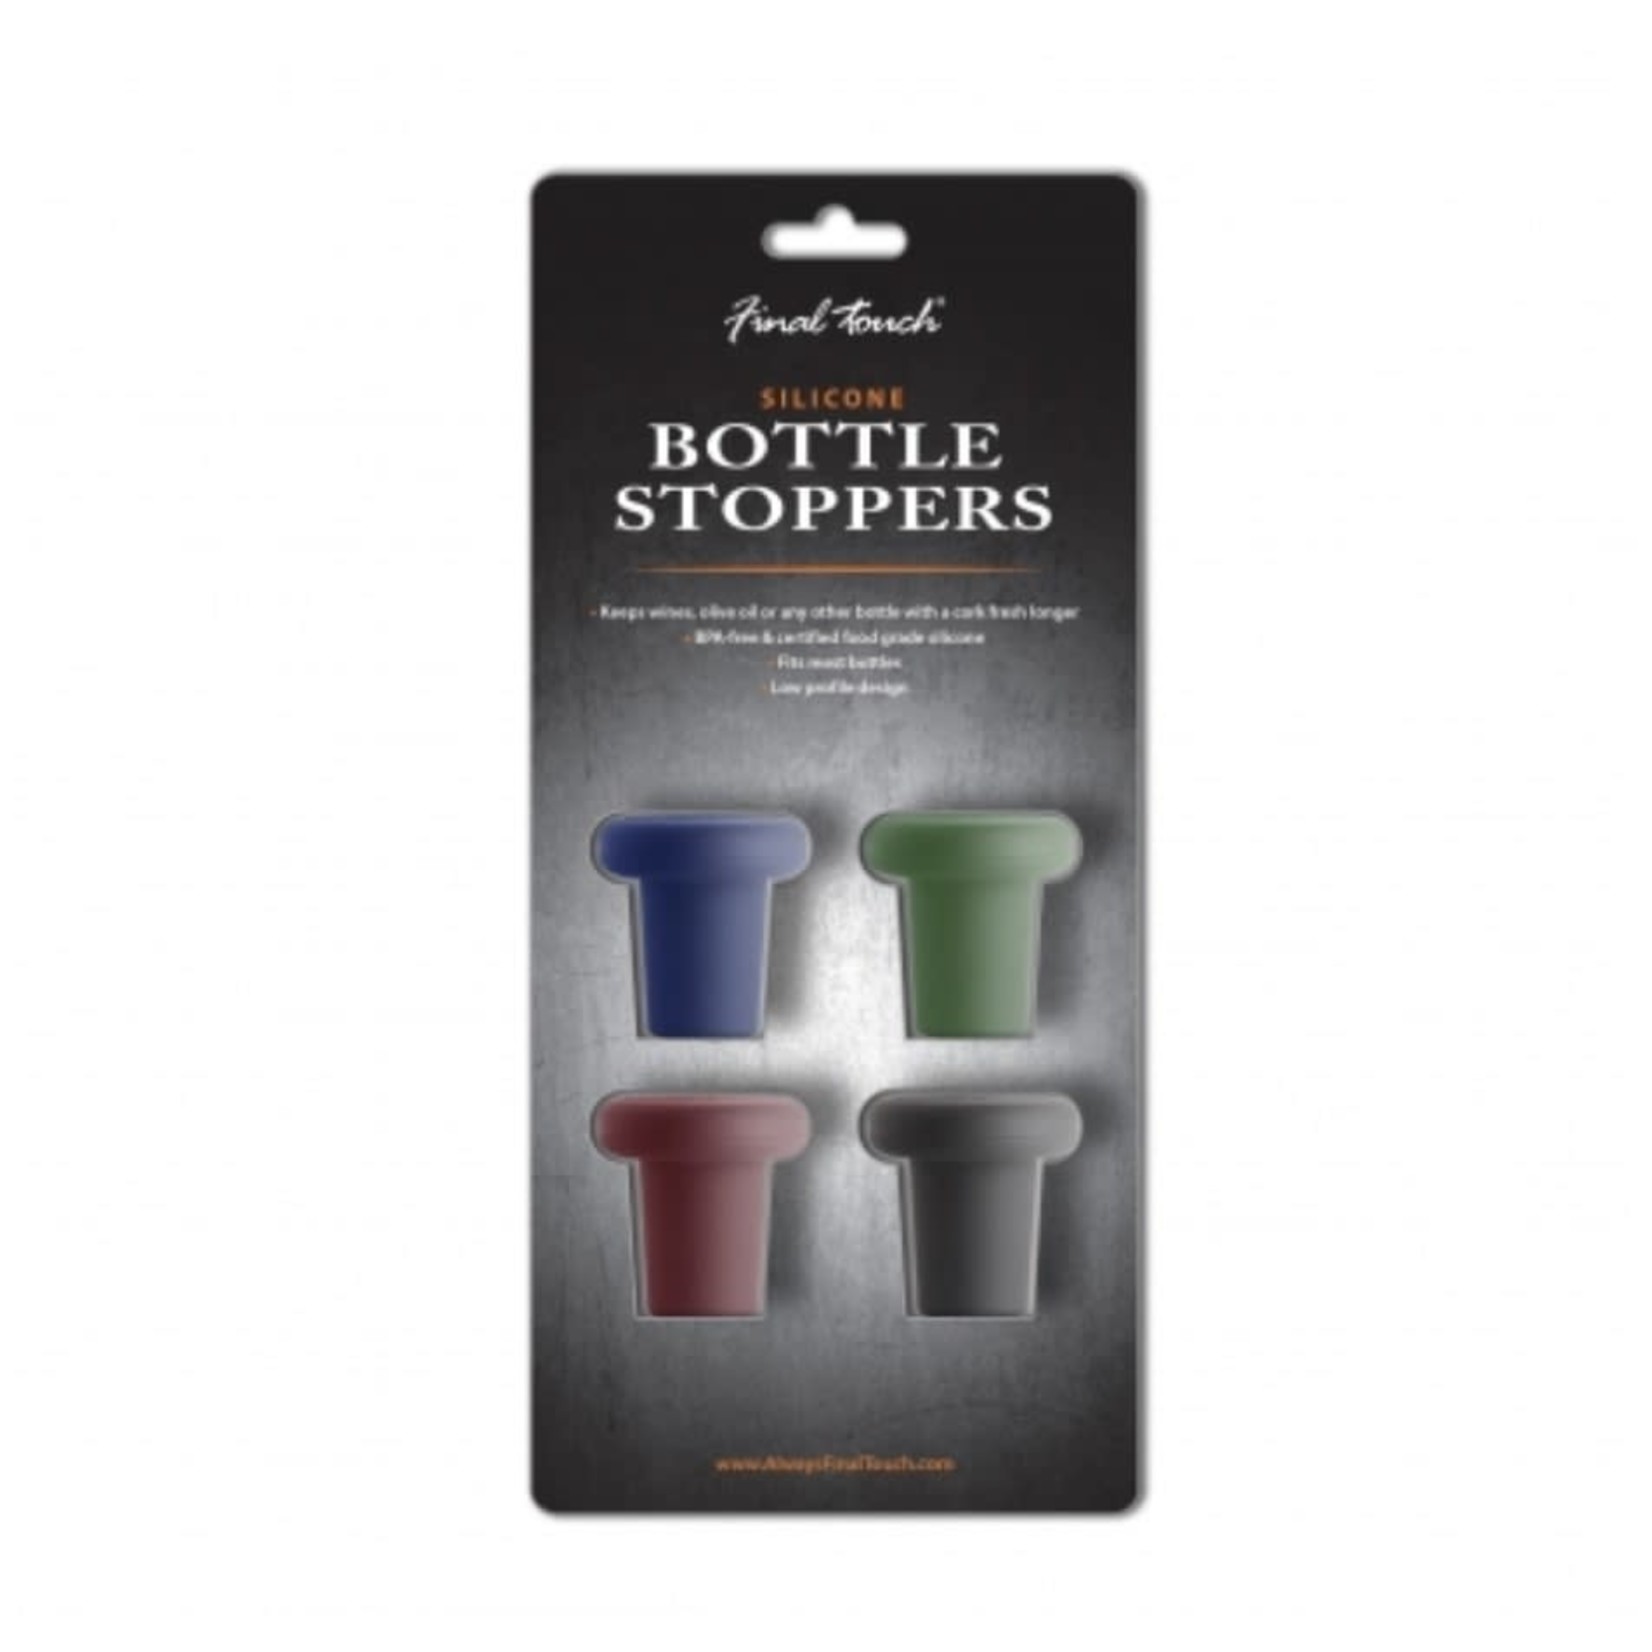 FINAL TOUCH FINAL TOUCH Silicone Bottle Stoppers S/4